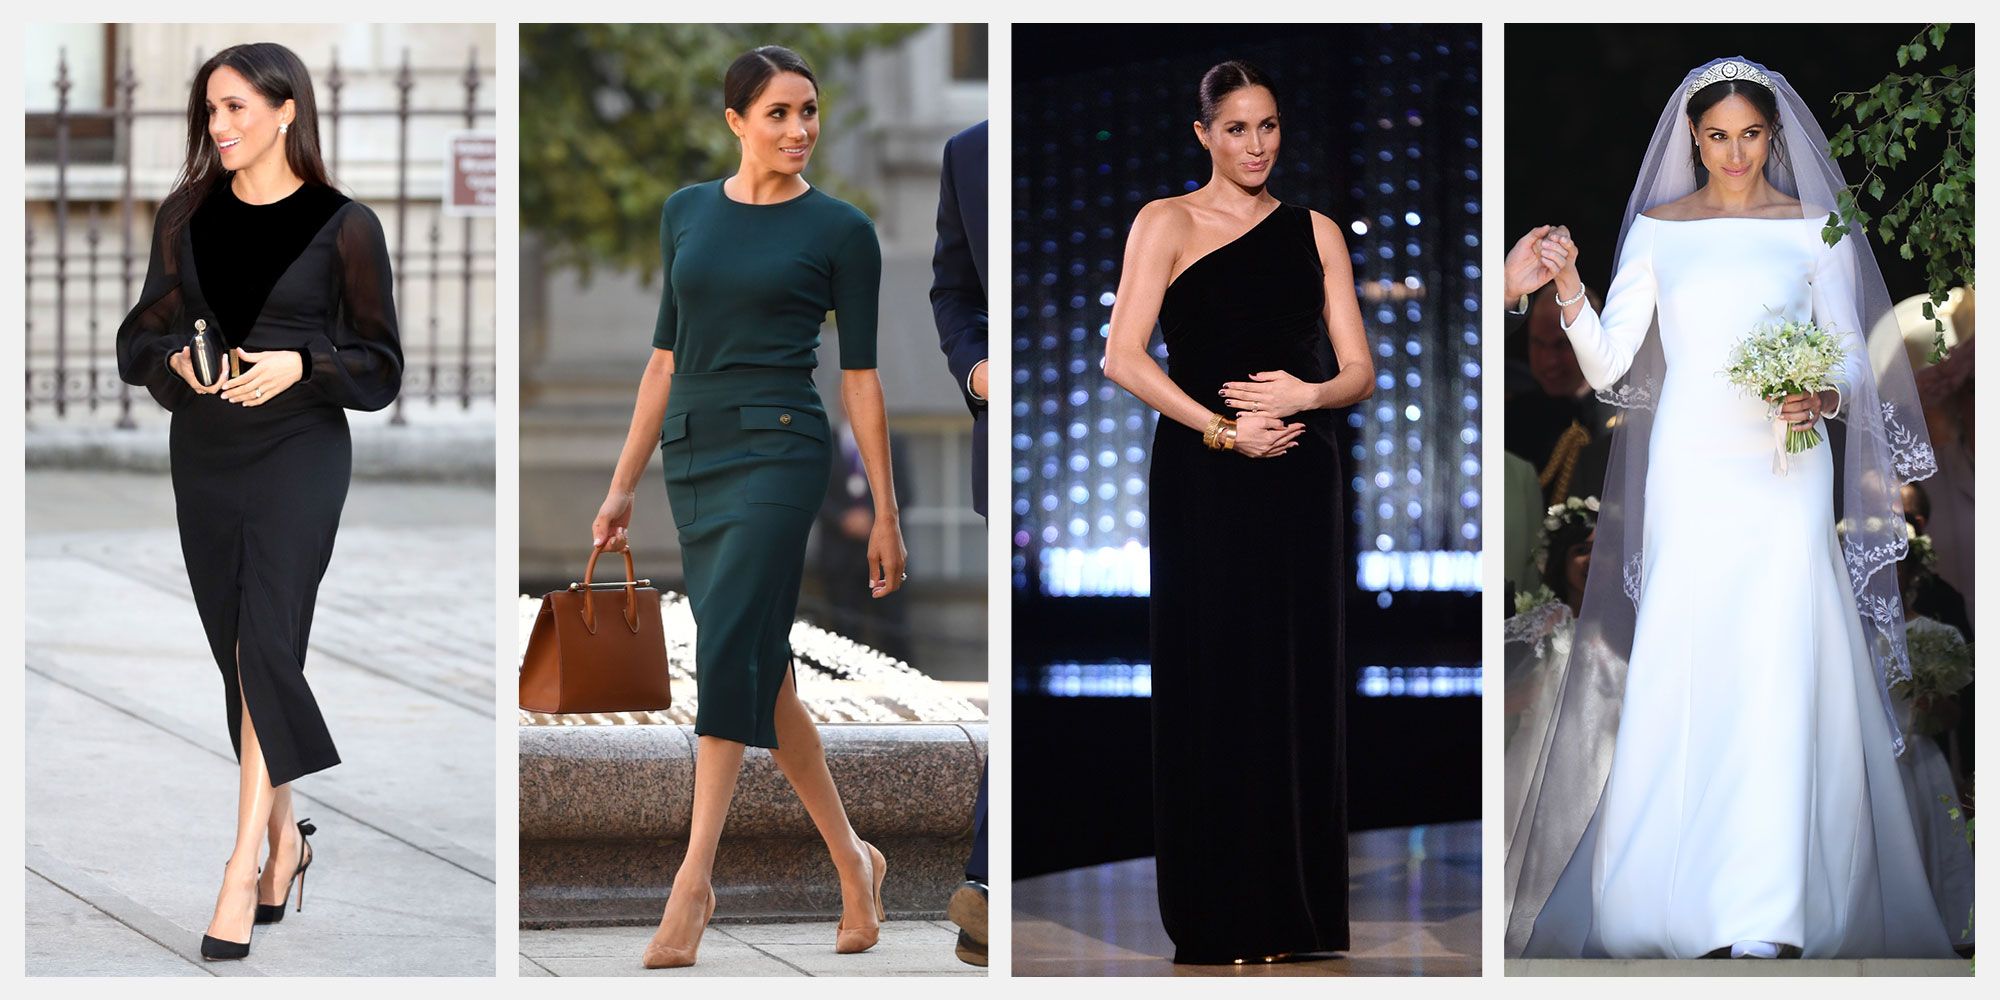 15+ Times Meghan Markle Wore Givenchy, from Her Wedding Dress to Her  One-Shoulder Gown